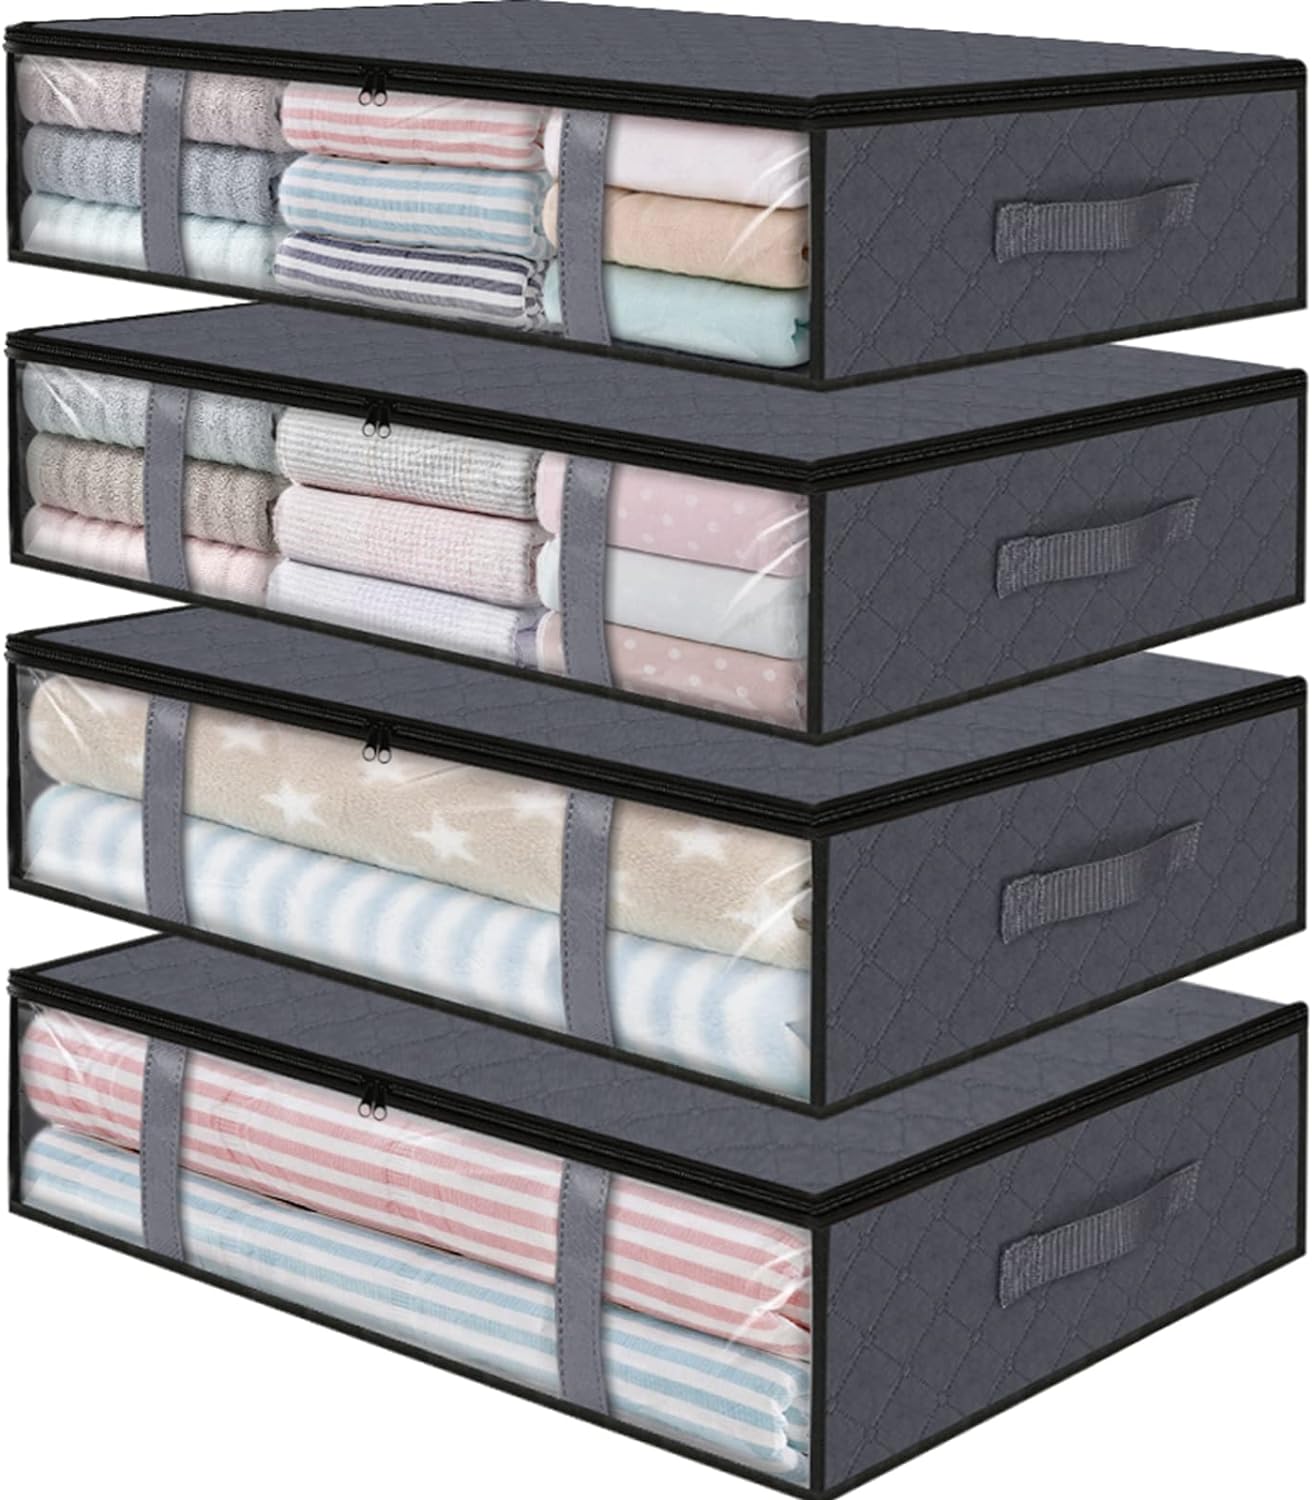 StorageRight Storage Bins Clothes Storage, Foldable Blanket Storage Bags, Under Bed Storage Containers for Organizing, Clothing, Bedroom, Comforter, Closet, Dorm, Quilts, Organizer, 4-Pack Grey